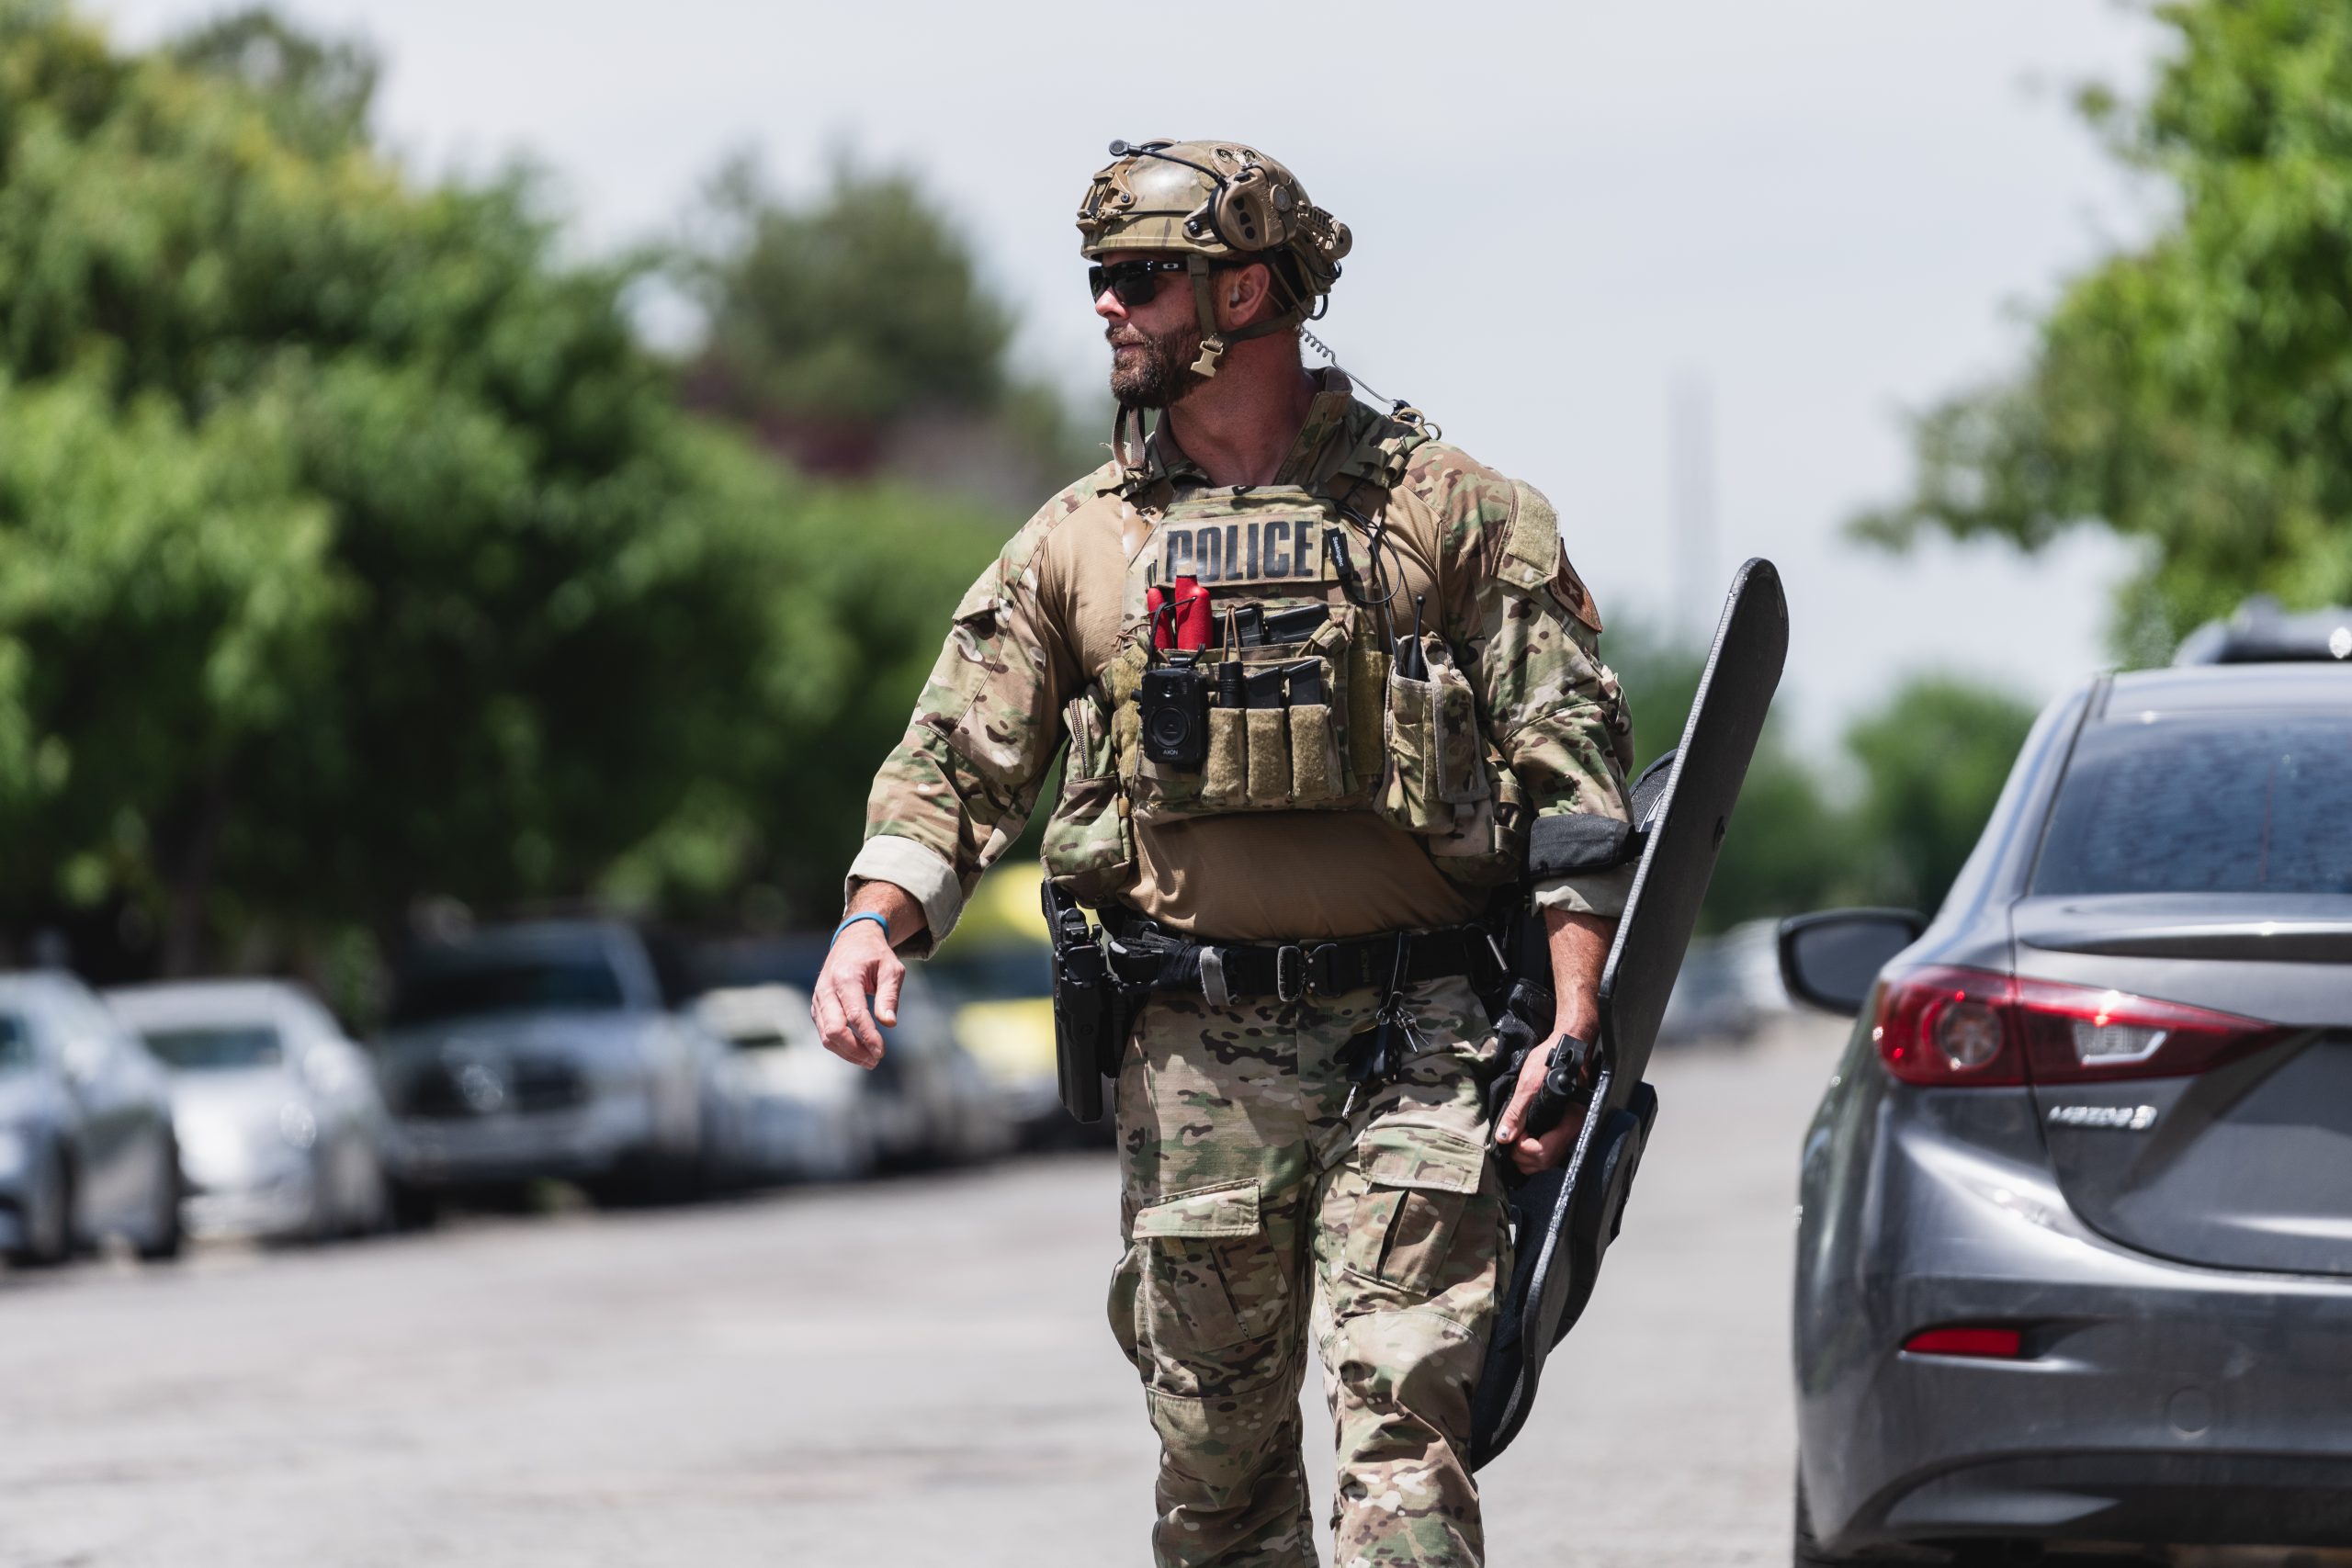 3-A SLCPD SWAT Operator leaving the scene of a domestic violence incident (SLCPD photo | June 22, 2023).